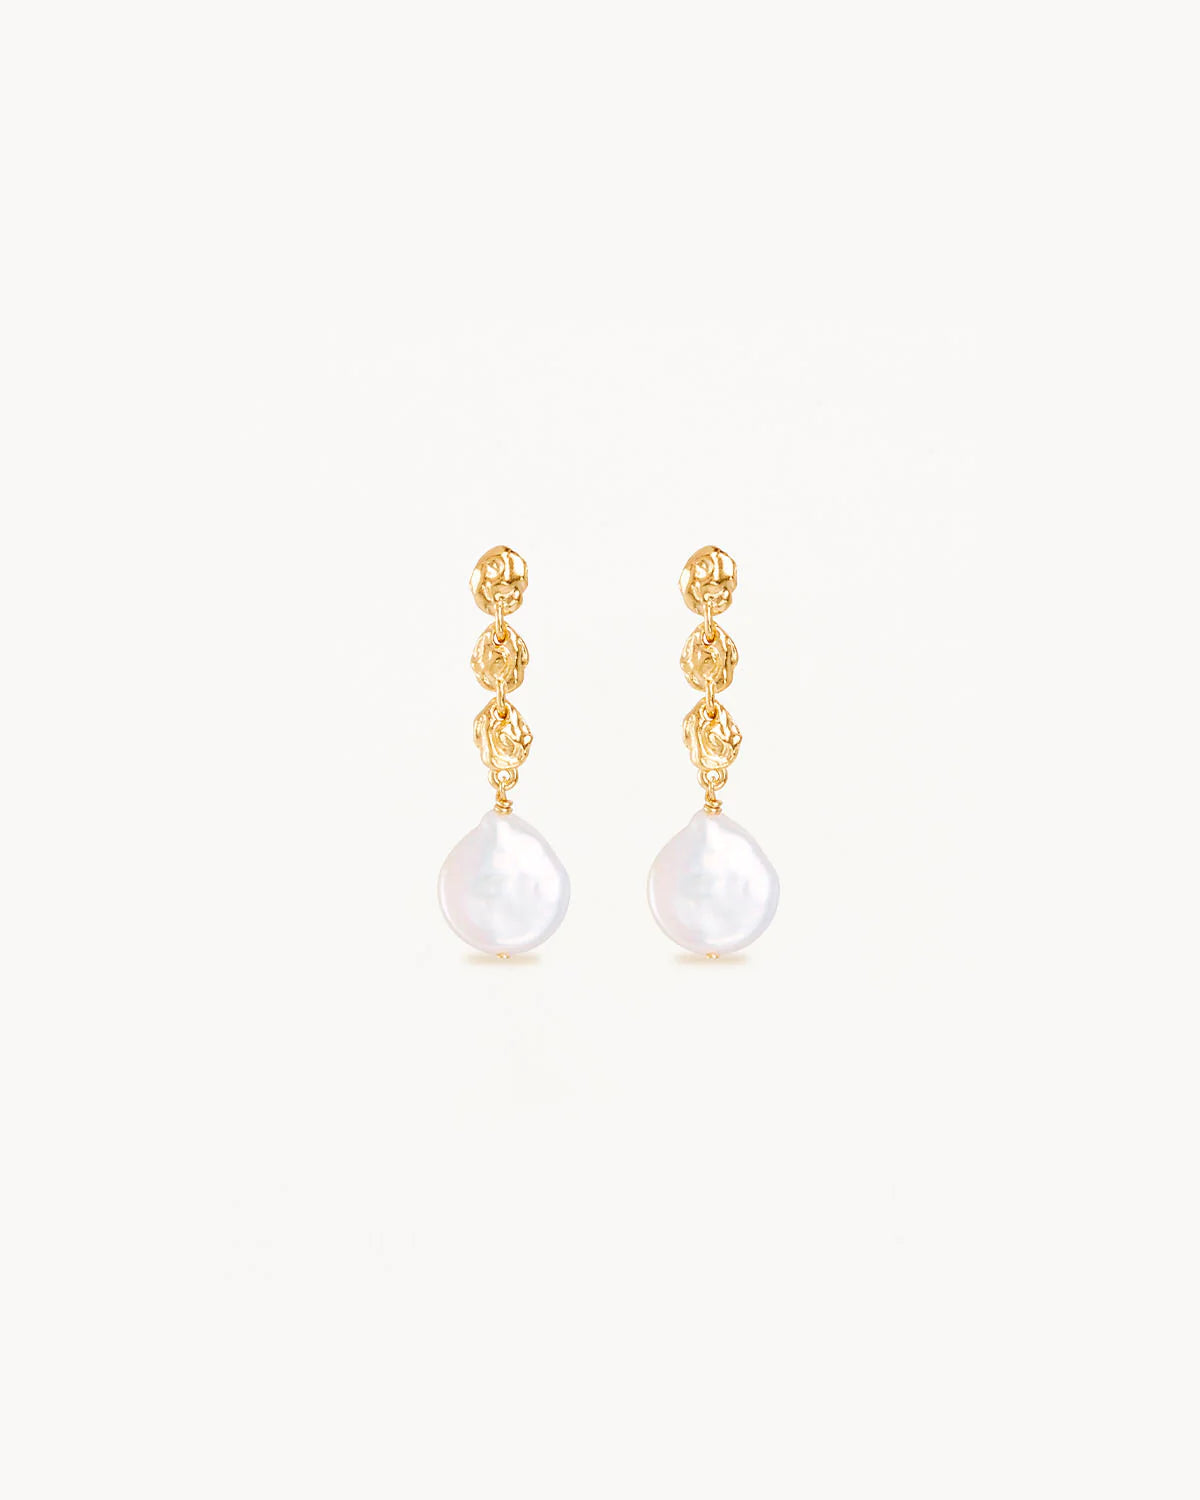 GROW WITH GRACE PEARL EARRINGS - GOLD